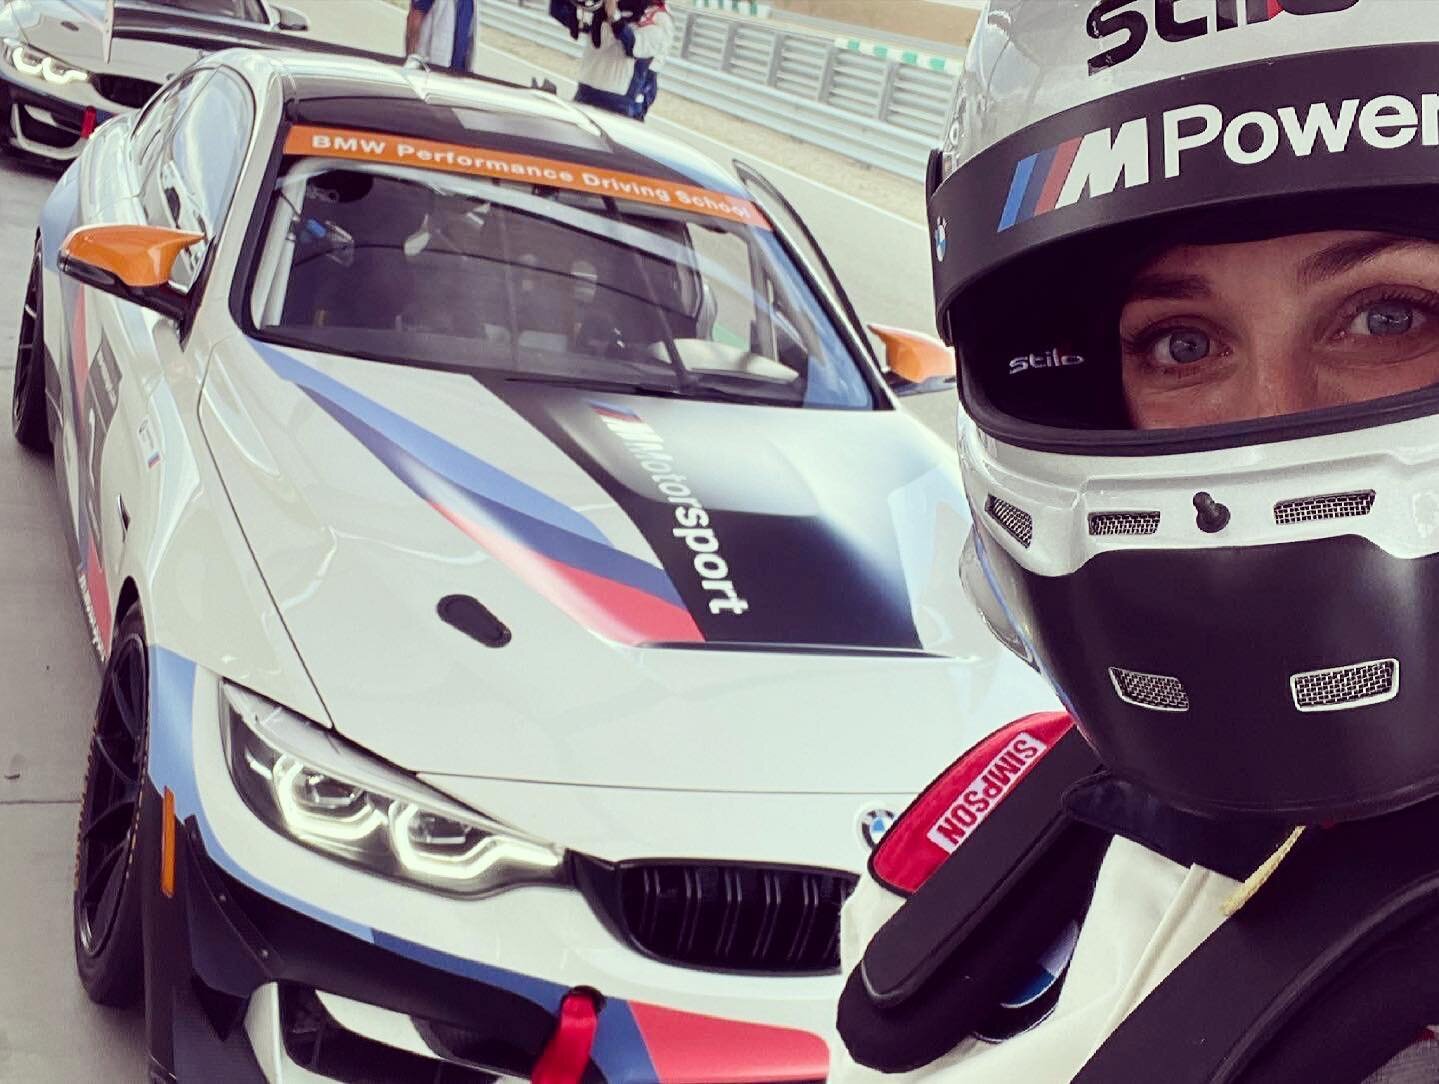 &ldquo;Great gifts are given to those who enter solitude and become still&rdquo; #sarahblondin 

@bmw #m4gt4 
@bmwperformancedrivingschools @66racerx @jonnymass @dusty.renteria #thankful #bestdayever #becauseracecar #meditation